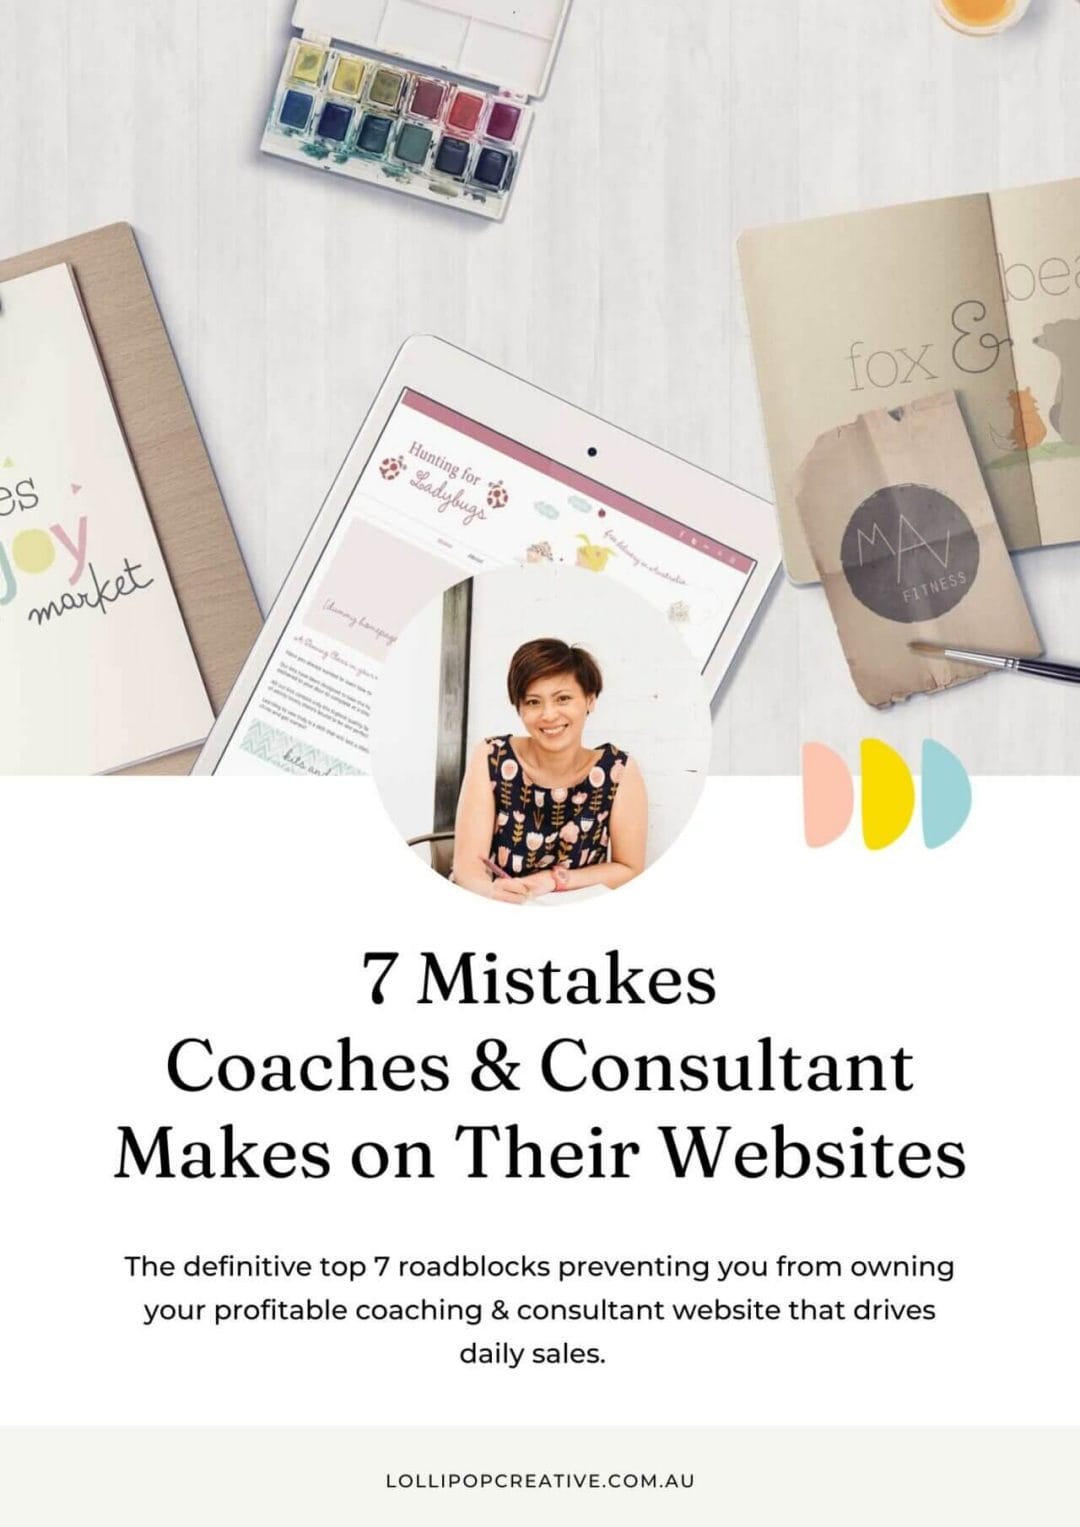 7 mistakes coaches & consultant makes on their websites